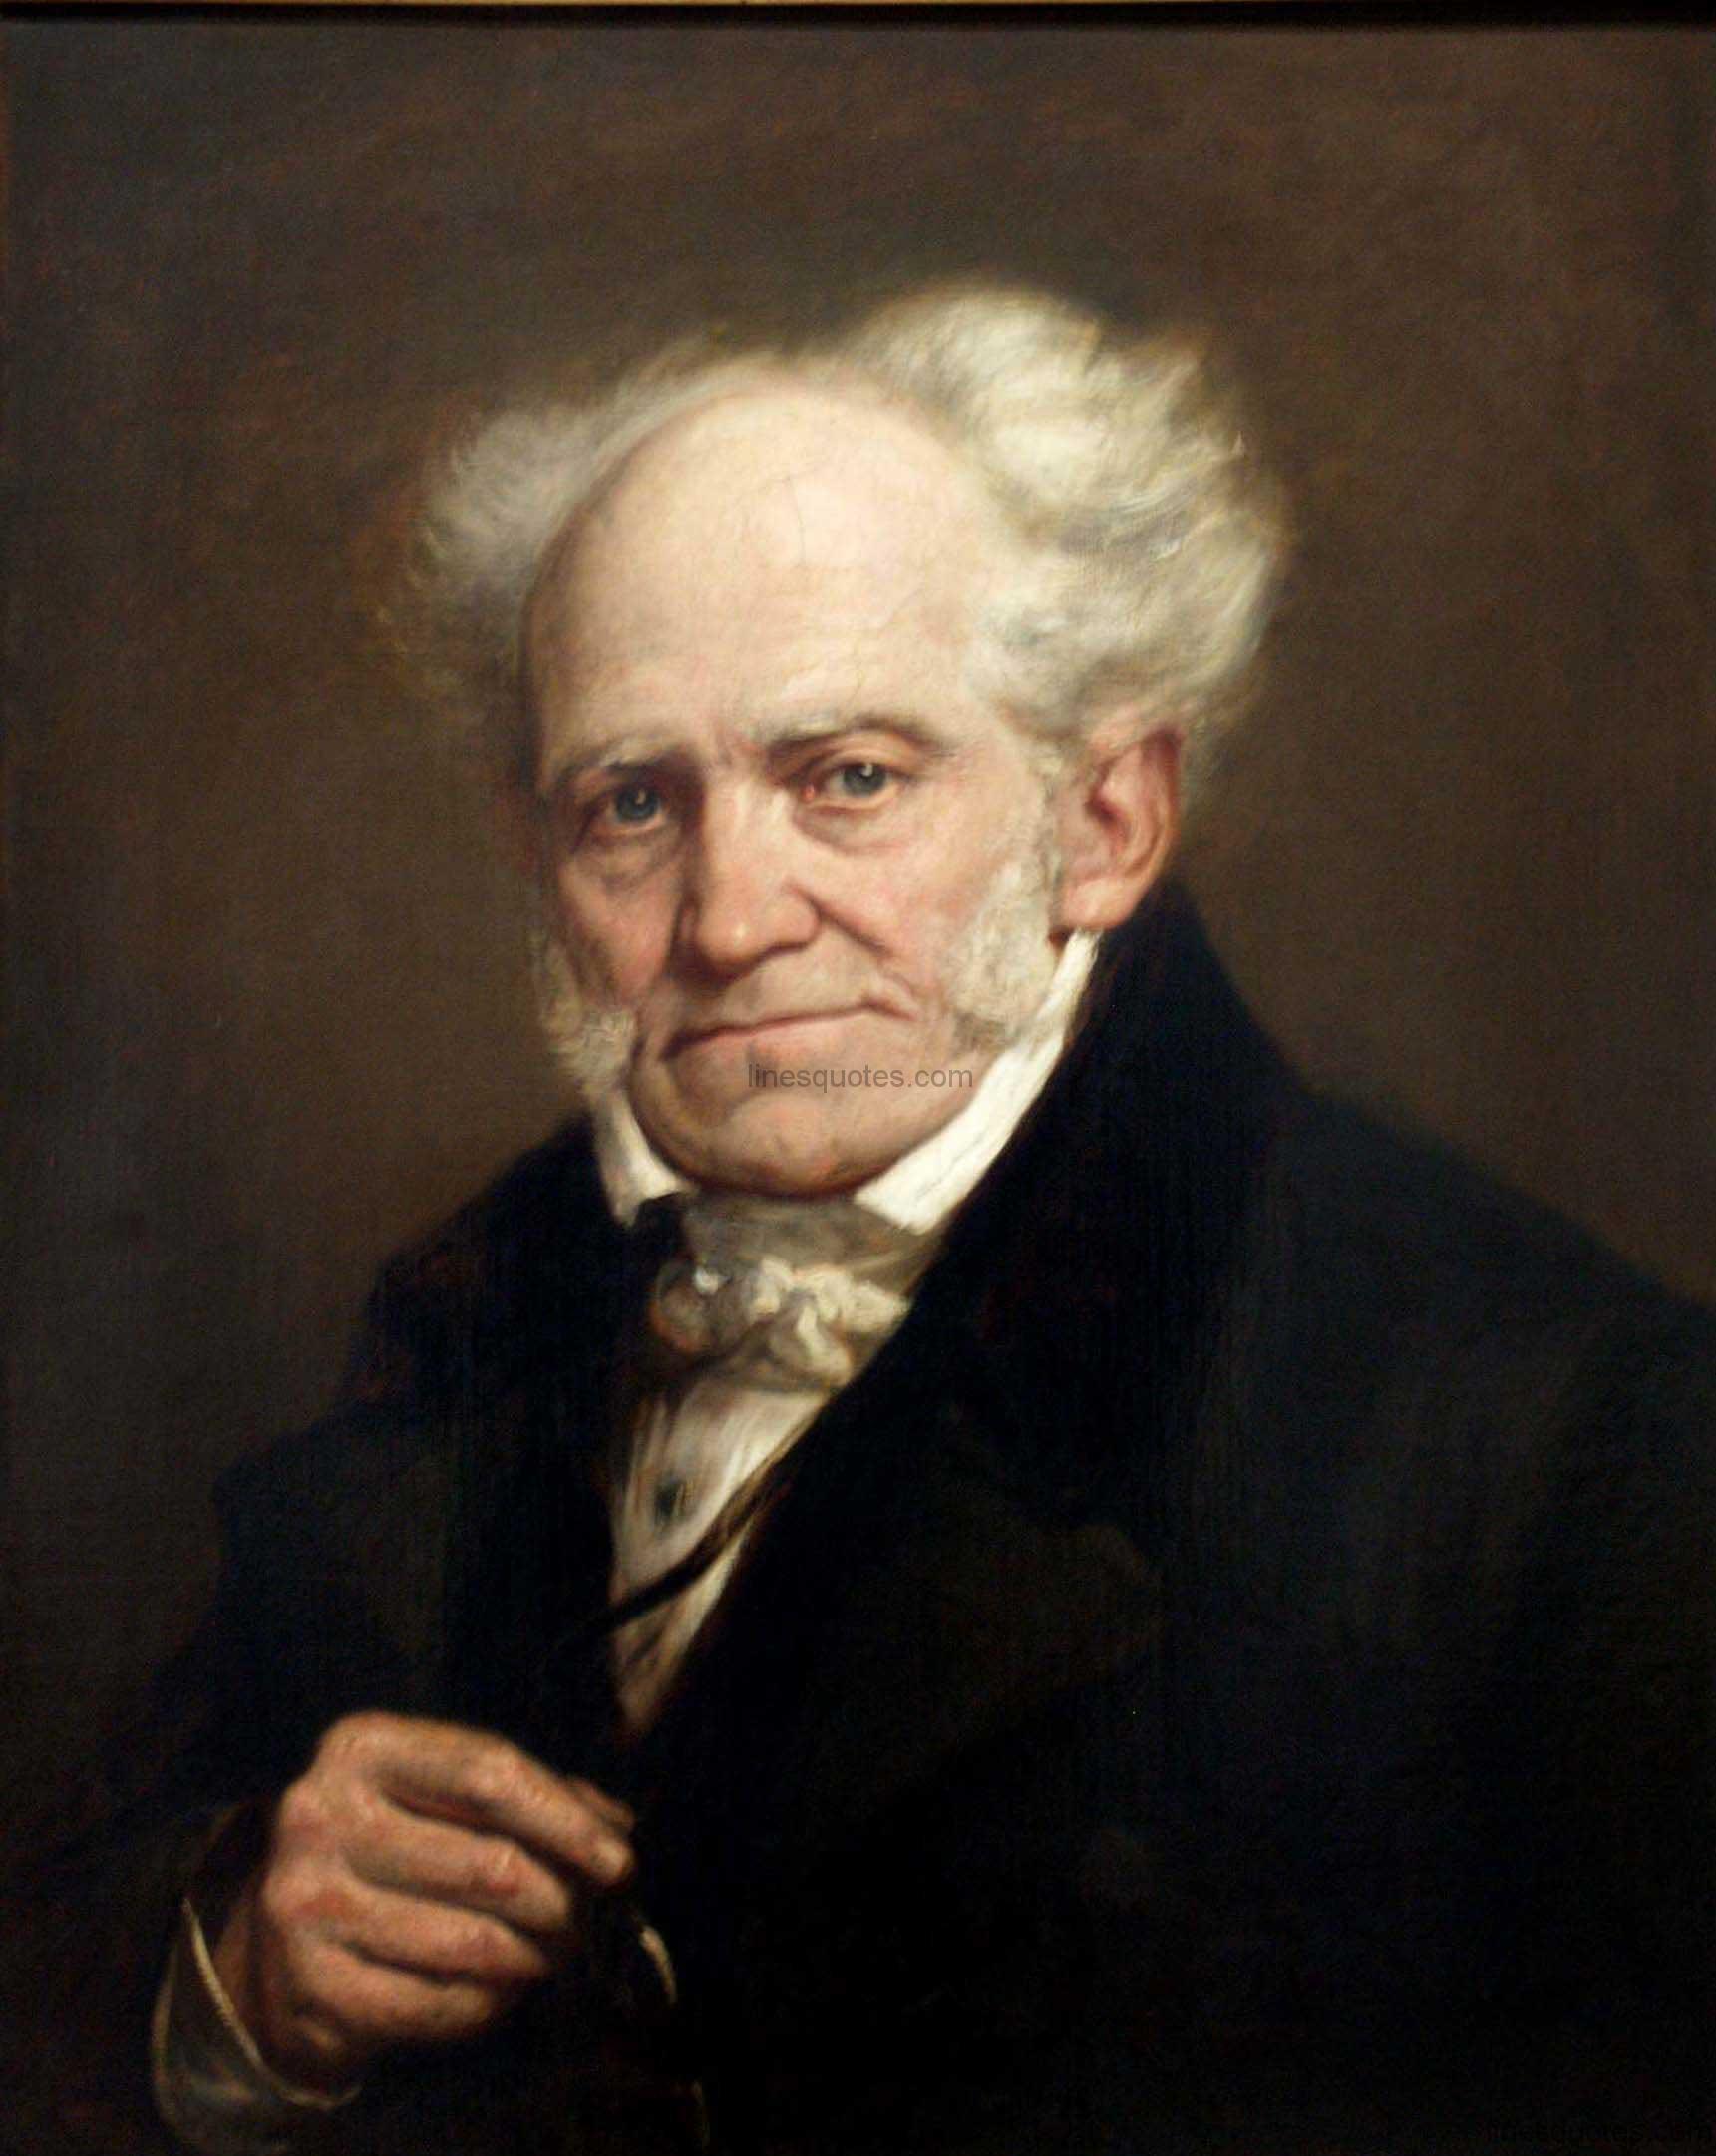 Arthur Schopenhauer Quotes And Sayings (With Images) - LinesQuotes.com